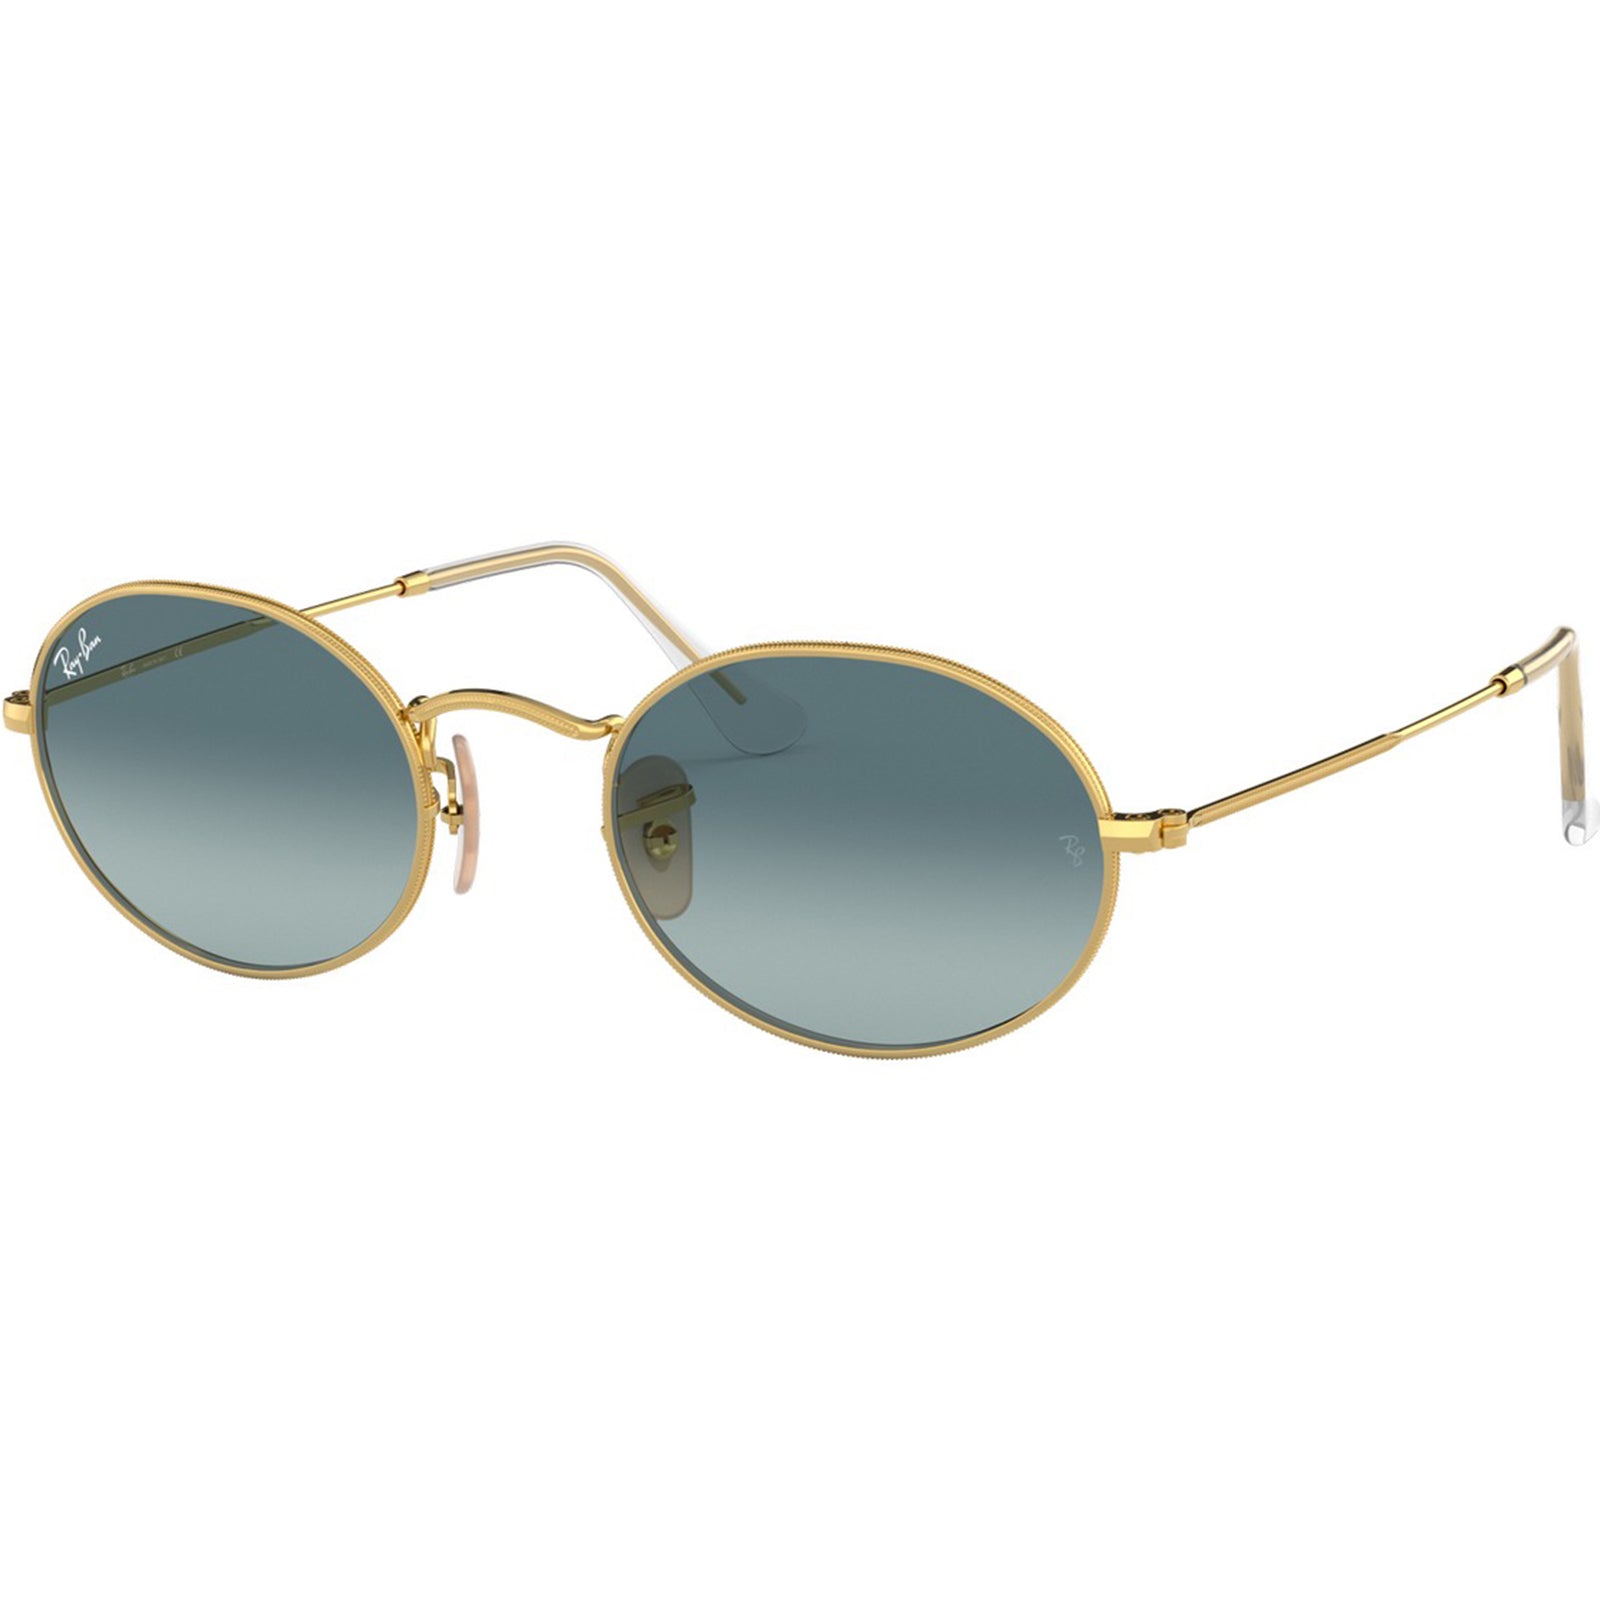 apparel ray ban lifestyle sunglasses mens rb3547 oval gold blue gradient